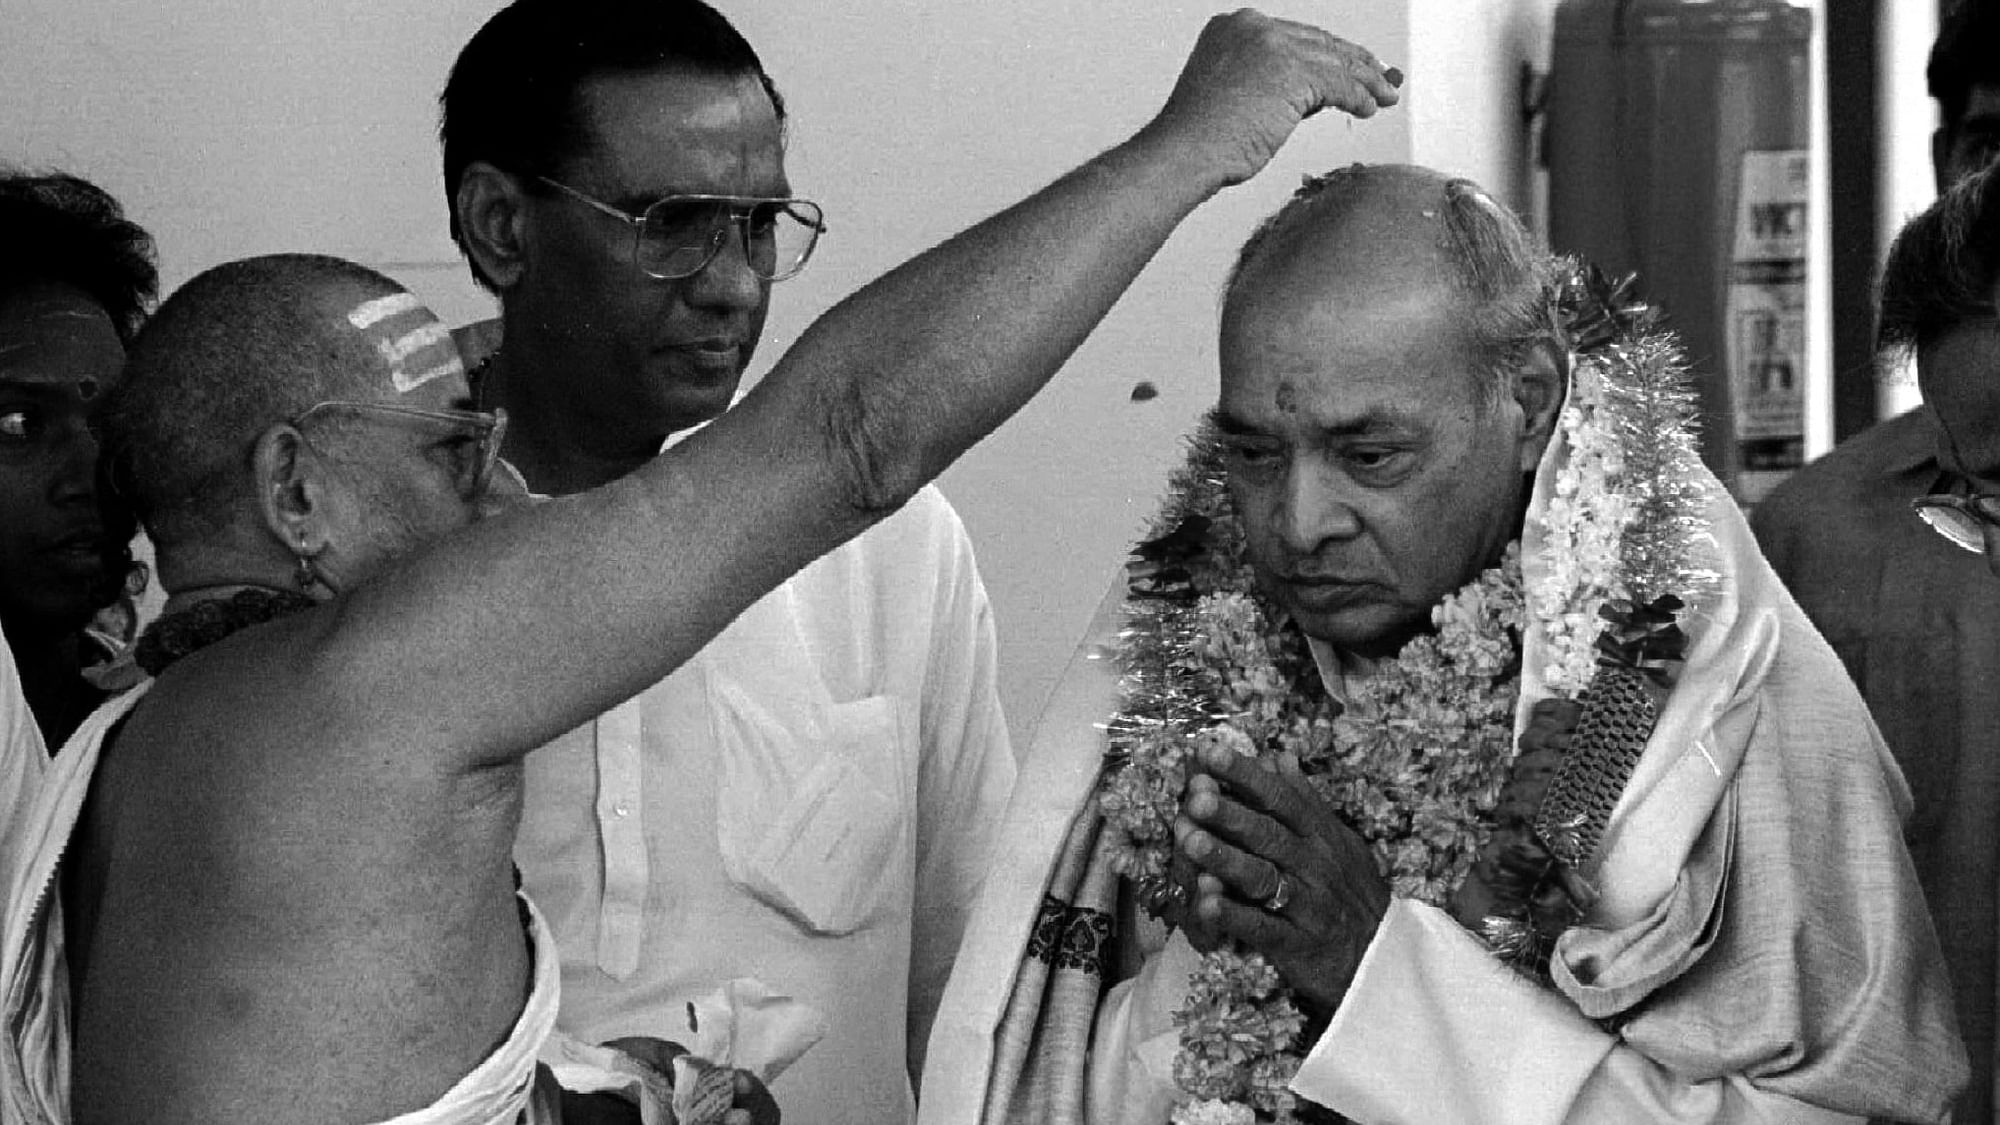 Former PM Narasimha Rao on completing 5 years as Prime Minister. (Photo: Reuters)